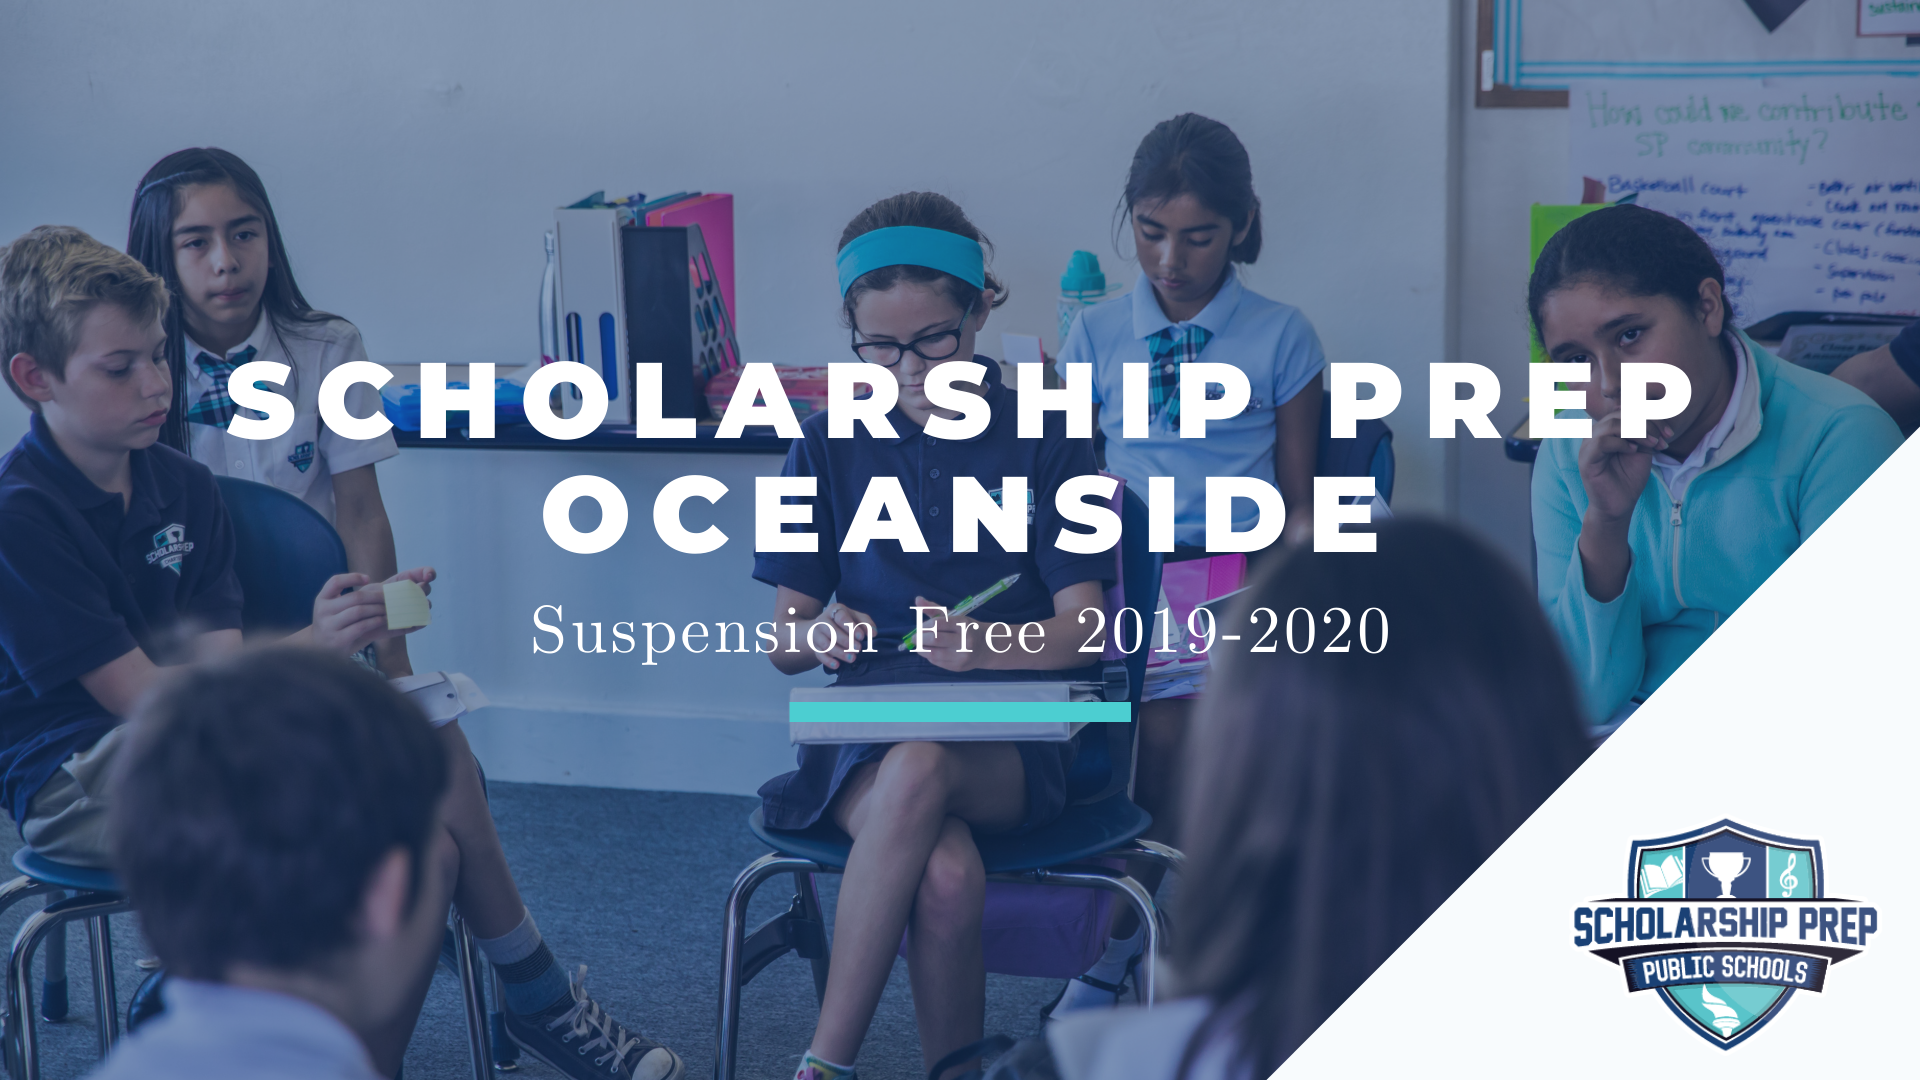 [INFOGRAPHIC] - How Scholarship Prep Oceanside Was a Suspension Free School in 2019-2020